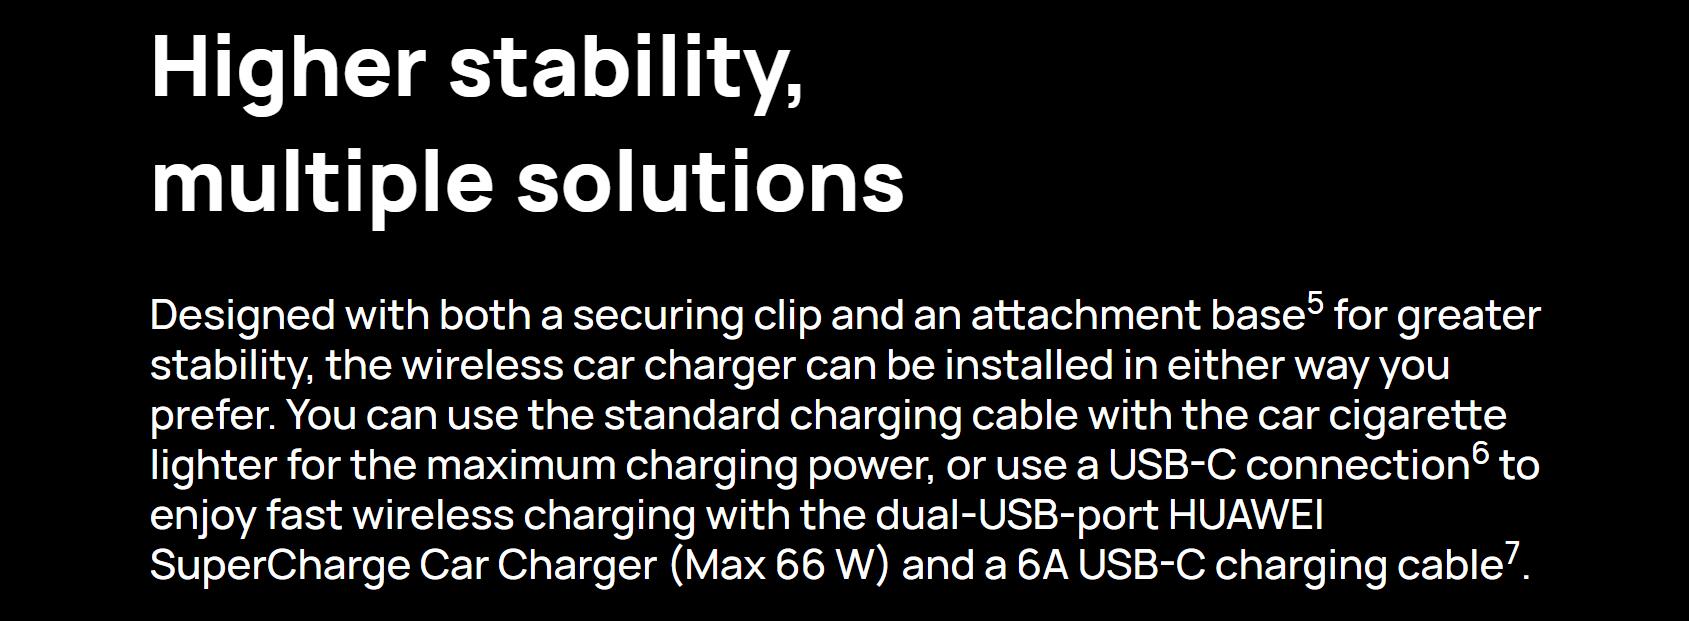 HUAWEI_50W_SuperCharge_Wireless_Car_Charger-14.jpg